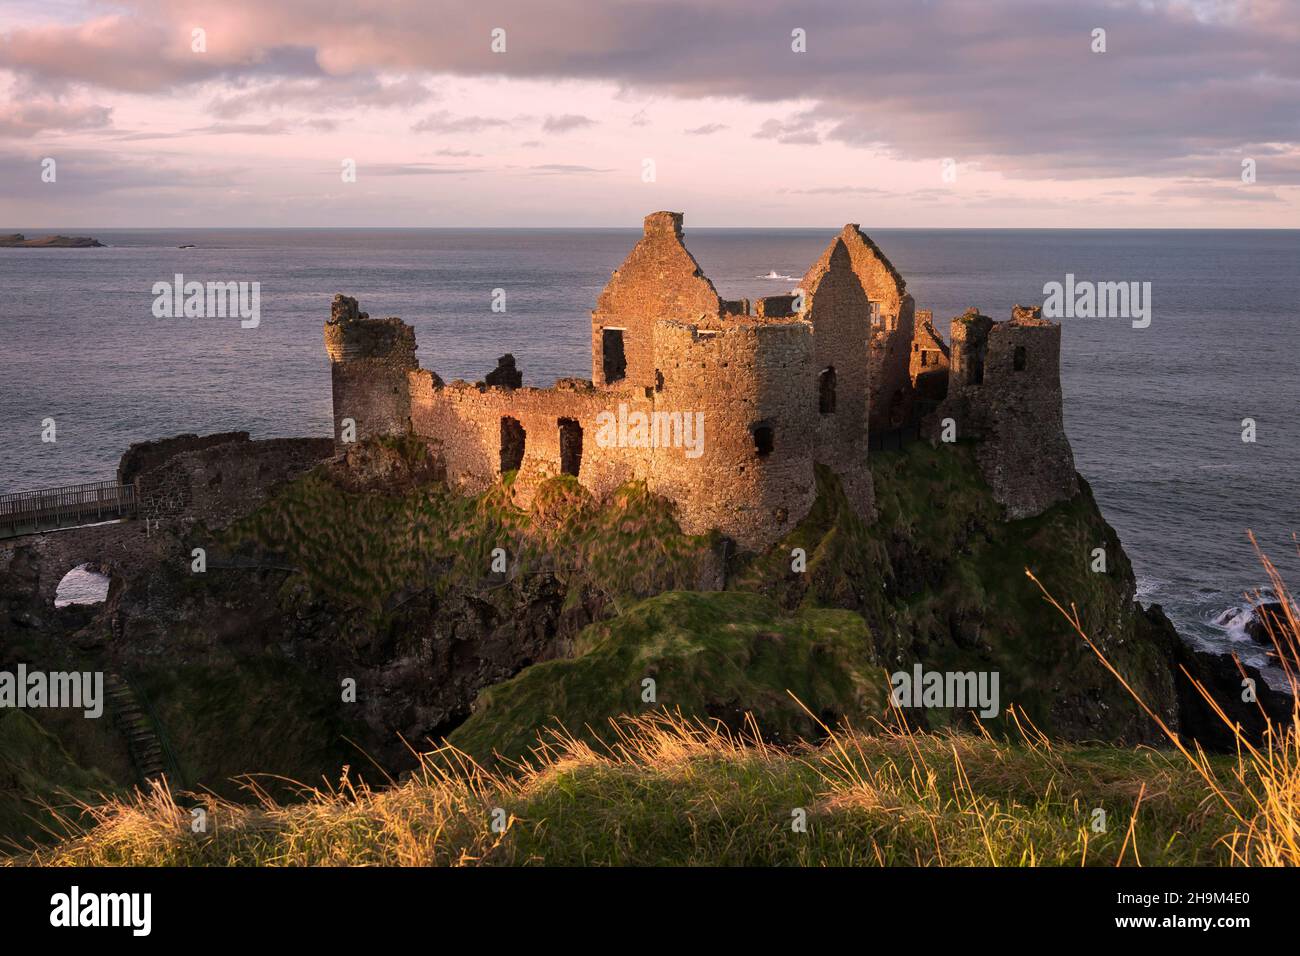 The iconic ruins of Dunluce Castle perched on a rocky outcrop on the North Antrim Coast in Northern Ireland. Stock Photo